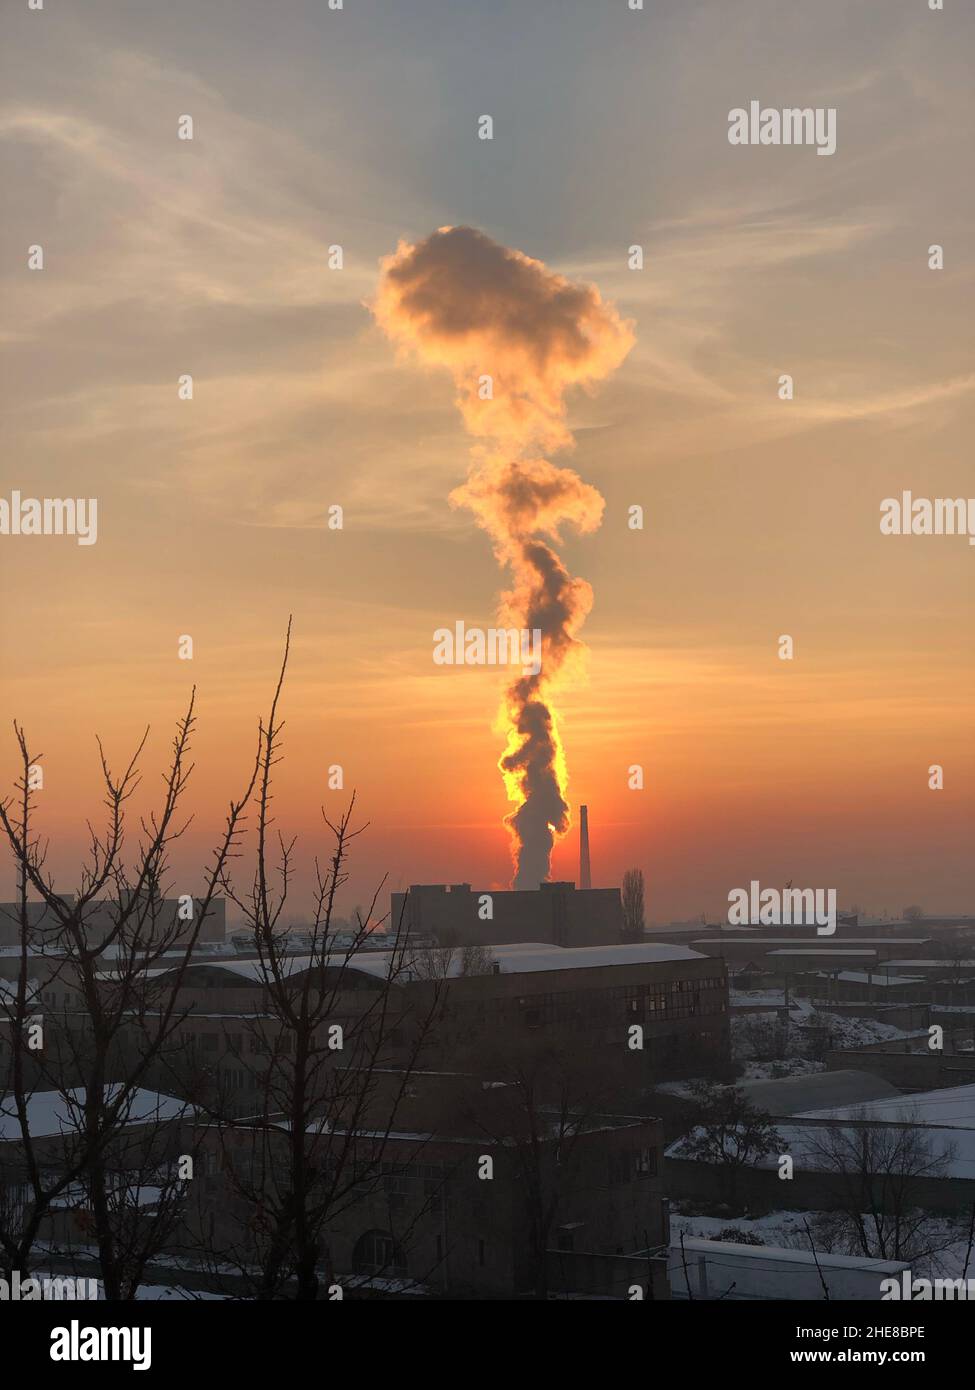 View of dense smoke coming out from the chimney at sunset sky background, Armenia Stock Photo